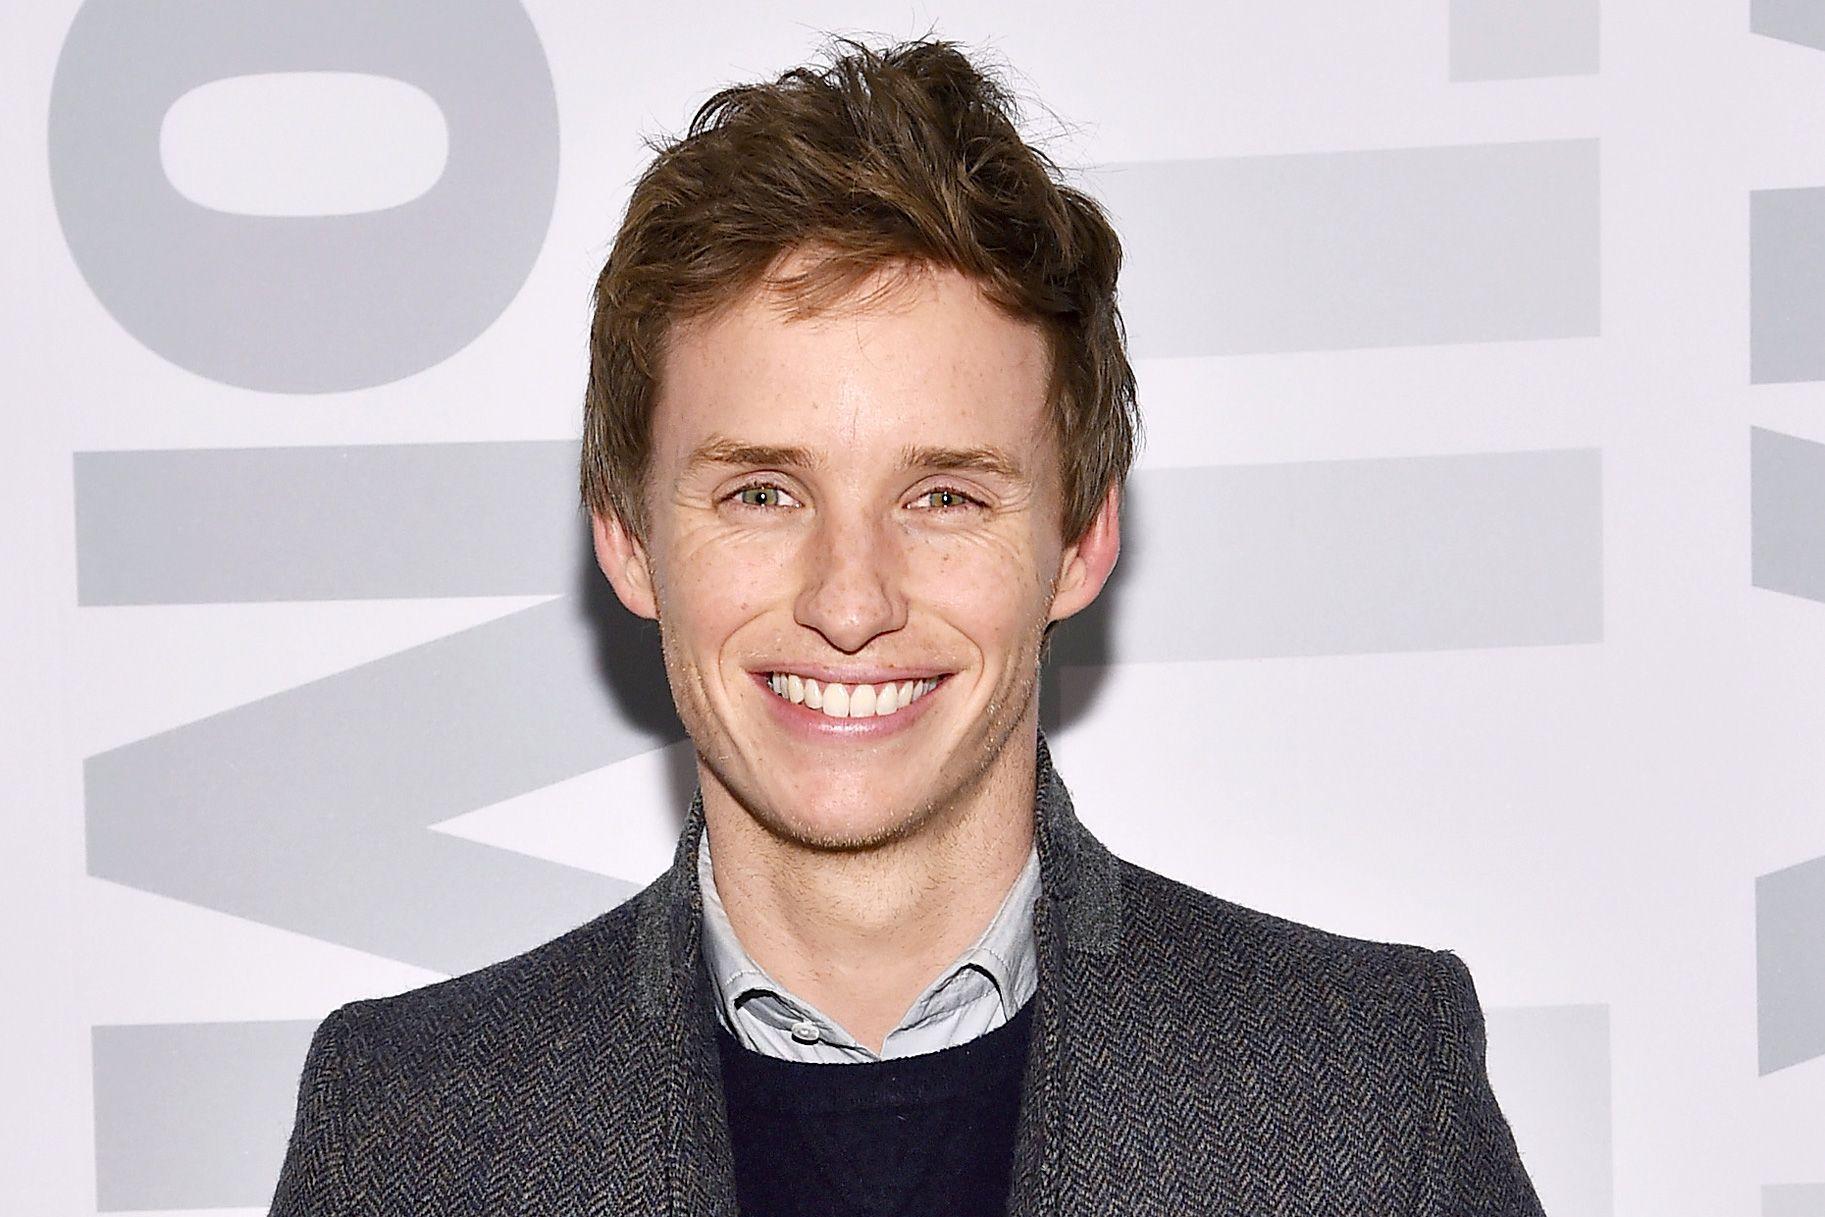 Eddie Redmayne: I'm Obsessed with the Real Housewives. The Daily Dish